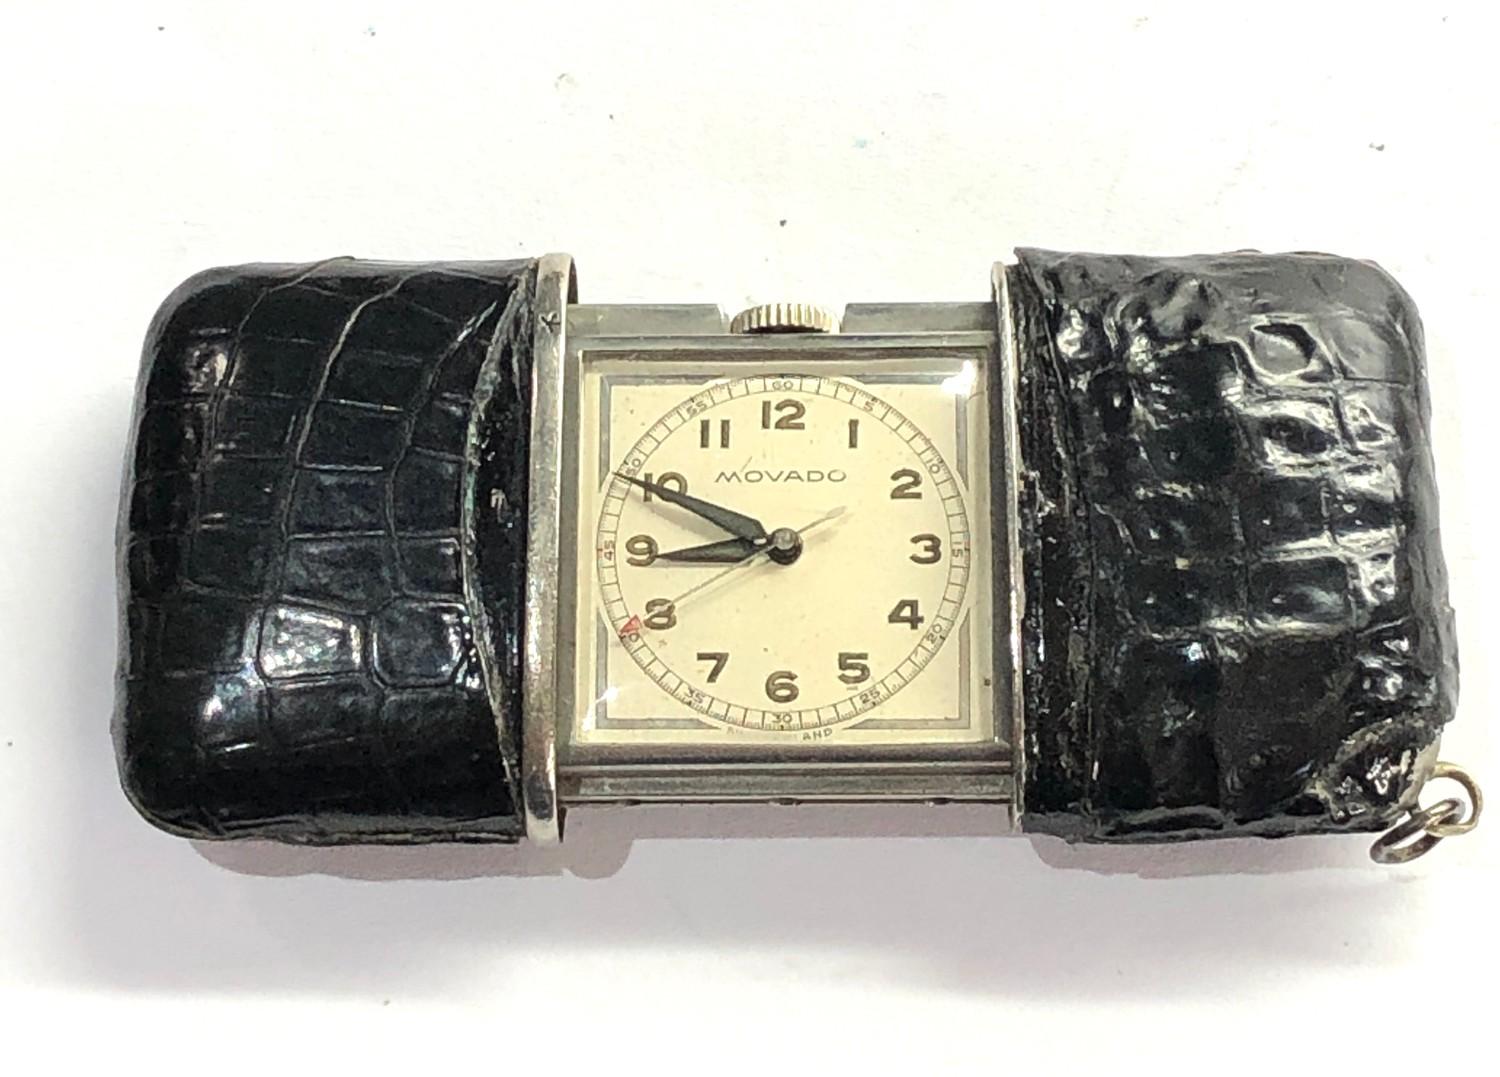 Movado purse watch black leather case the centre second watch is in good working condition shown